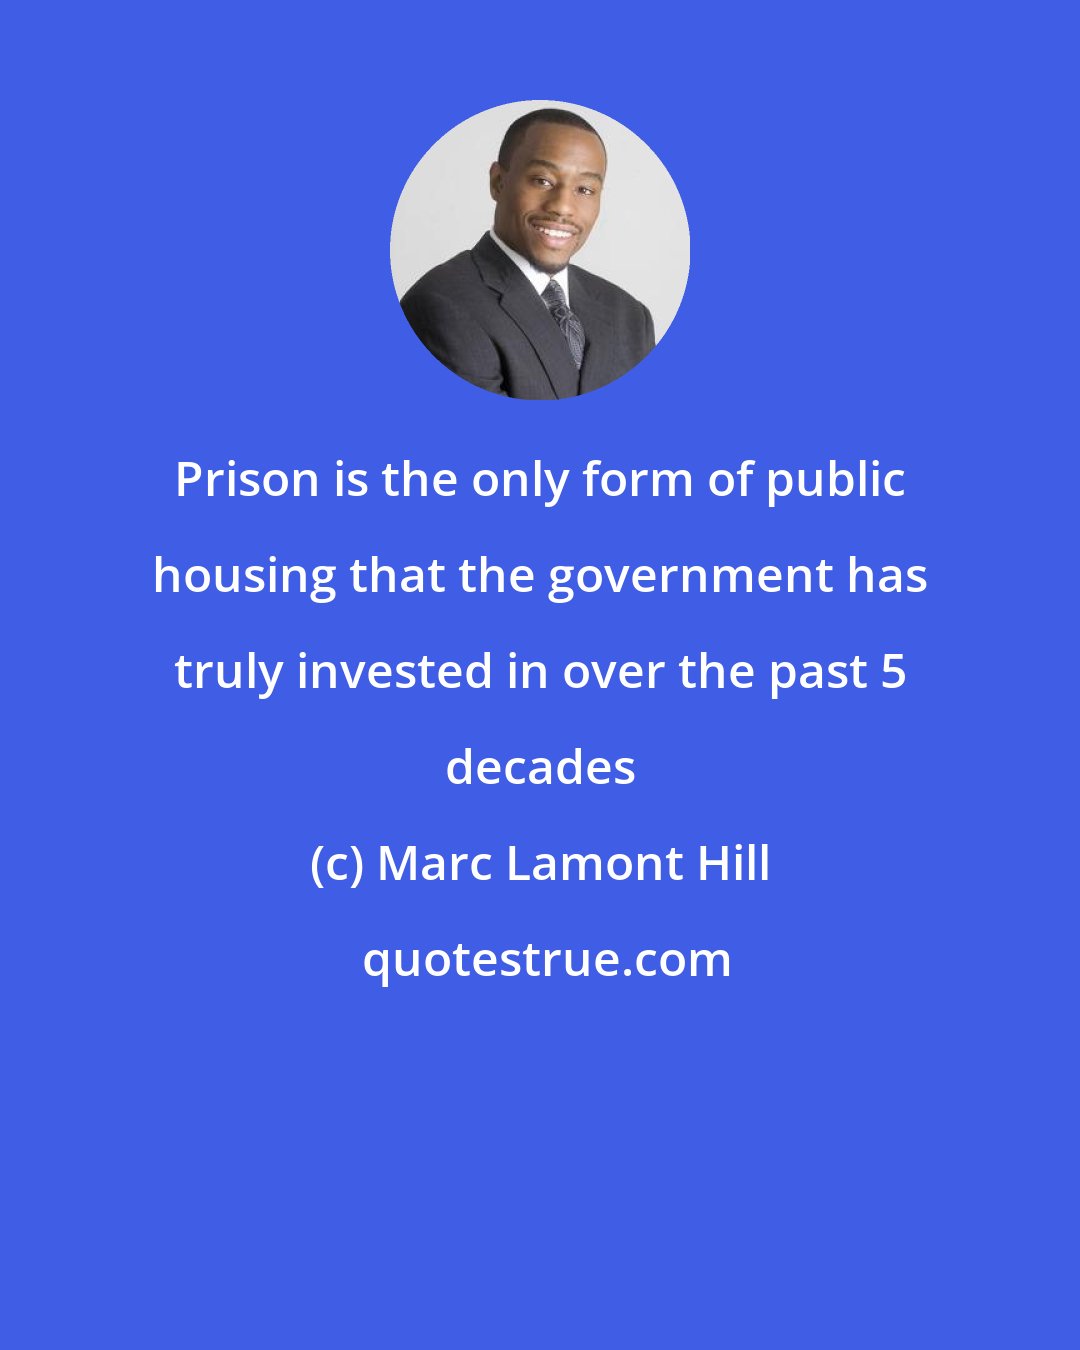 Marc Lamont Hill: Prison is the only form of public housing that the government has truly invested in over the past 5 decades